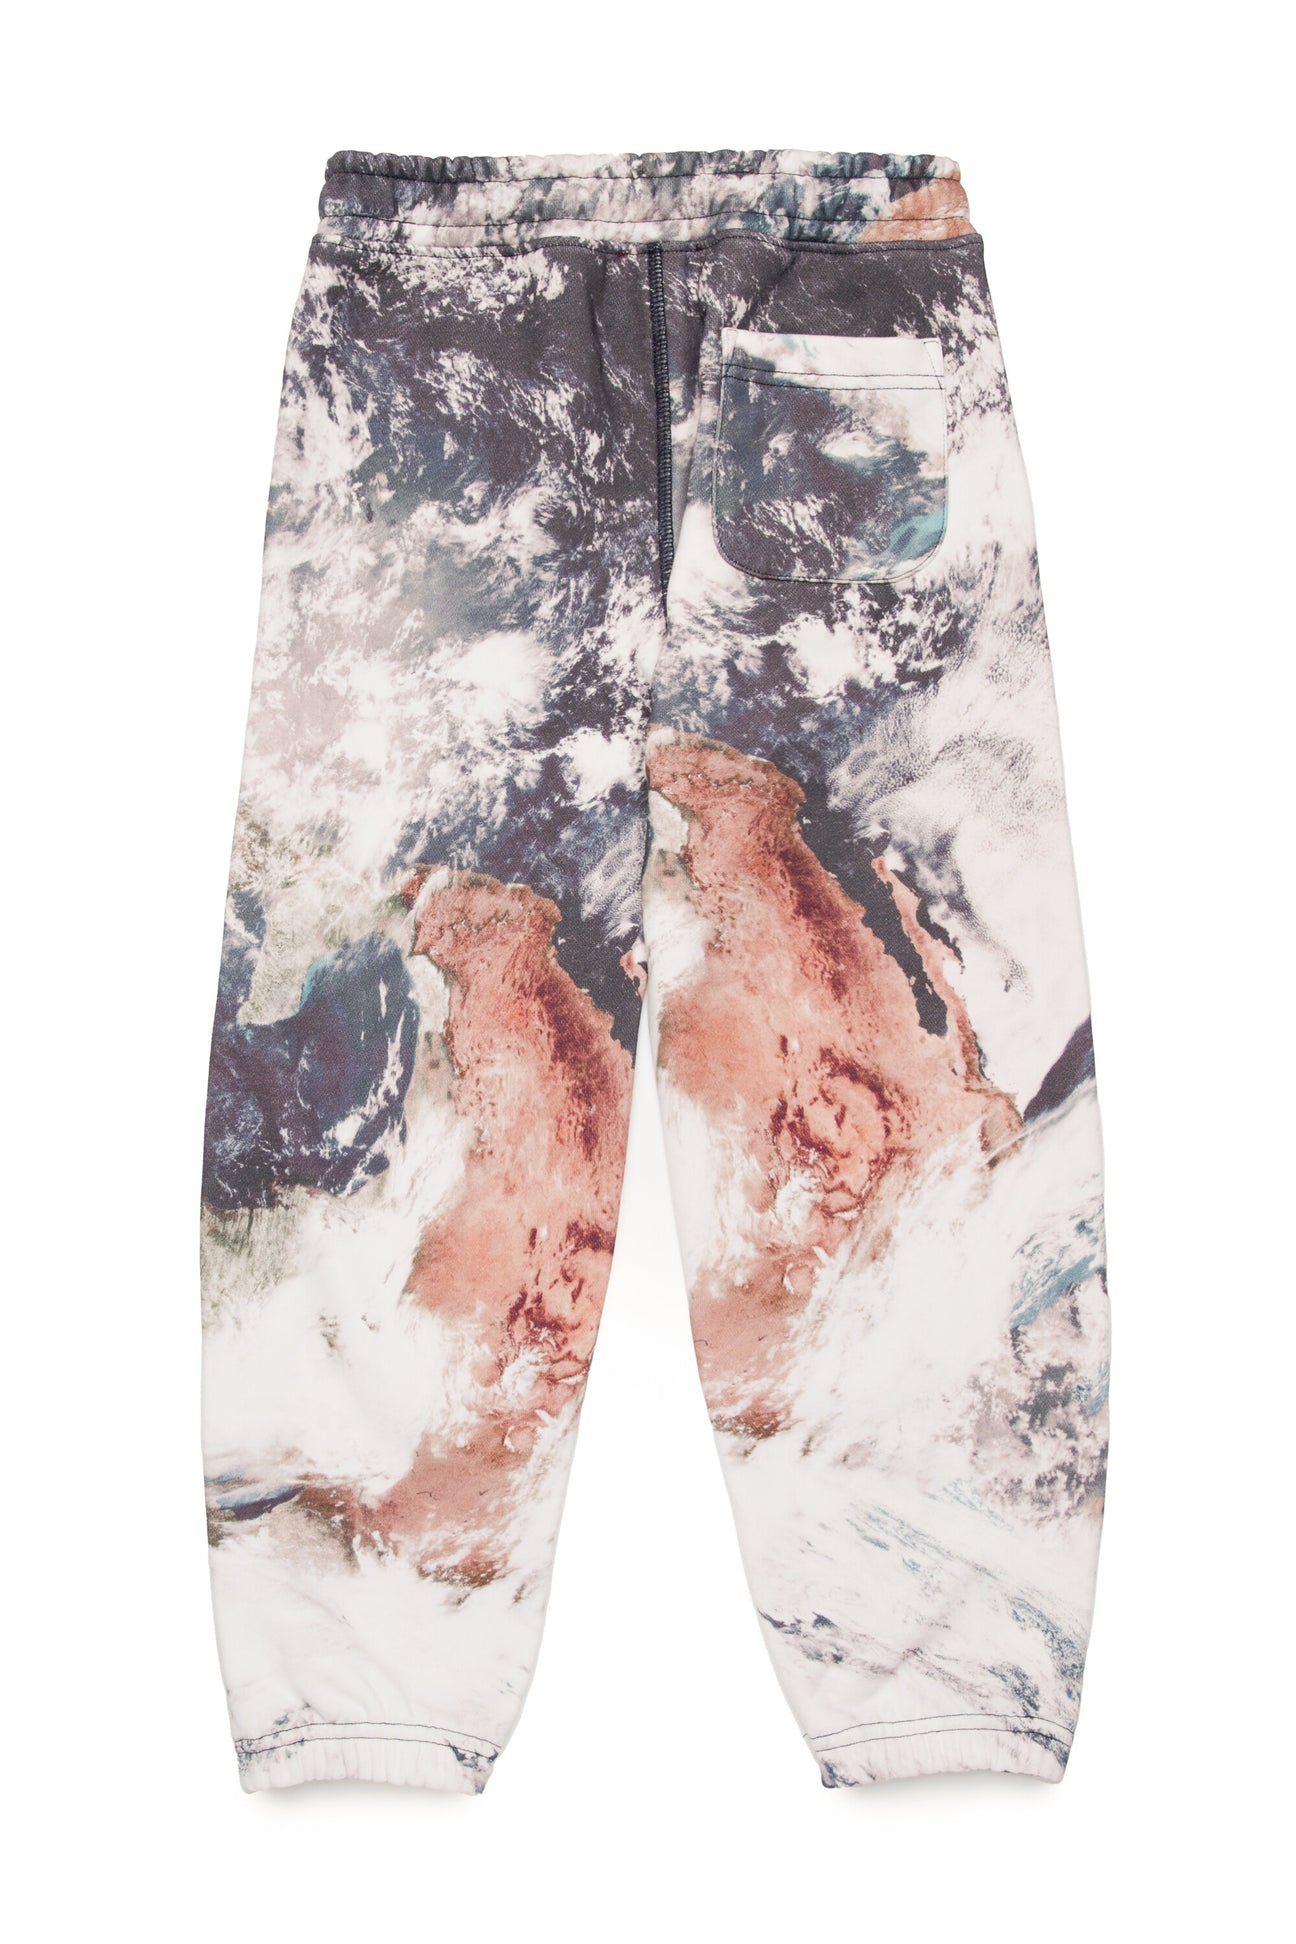 All-over Planet Camou jogger trousers All-over Planet Camou jogger trousers